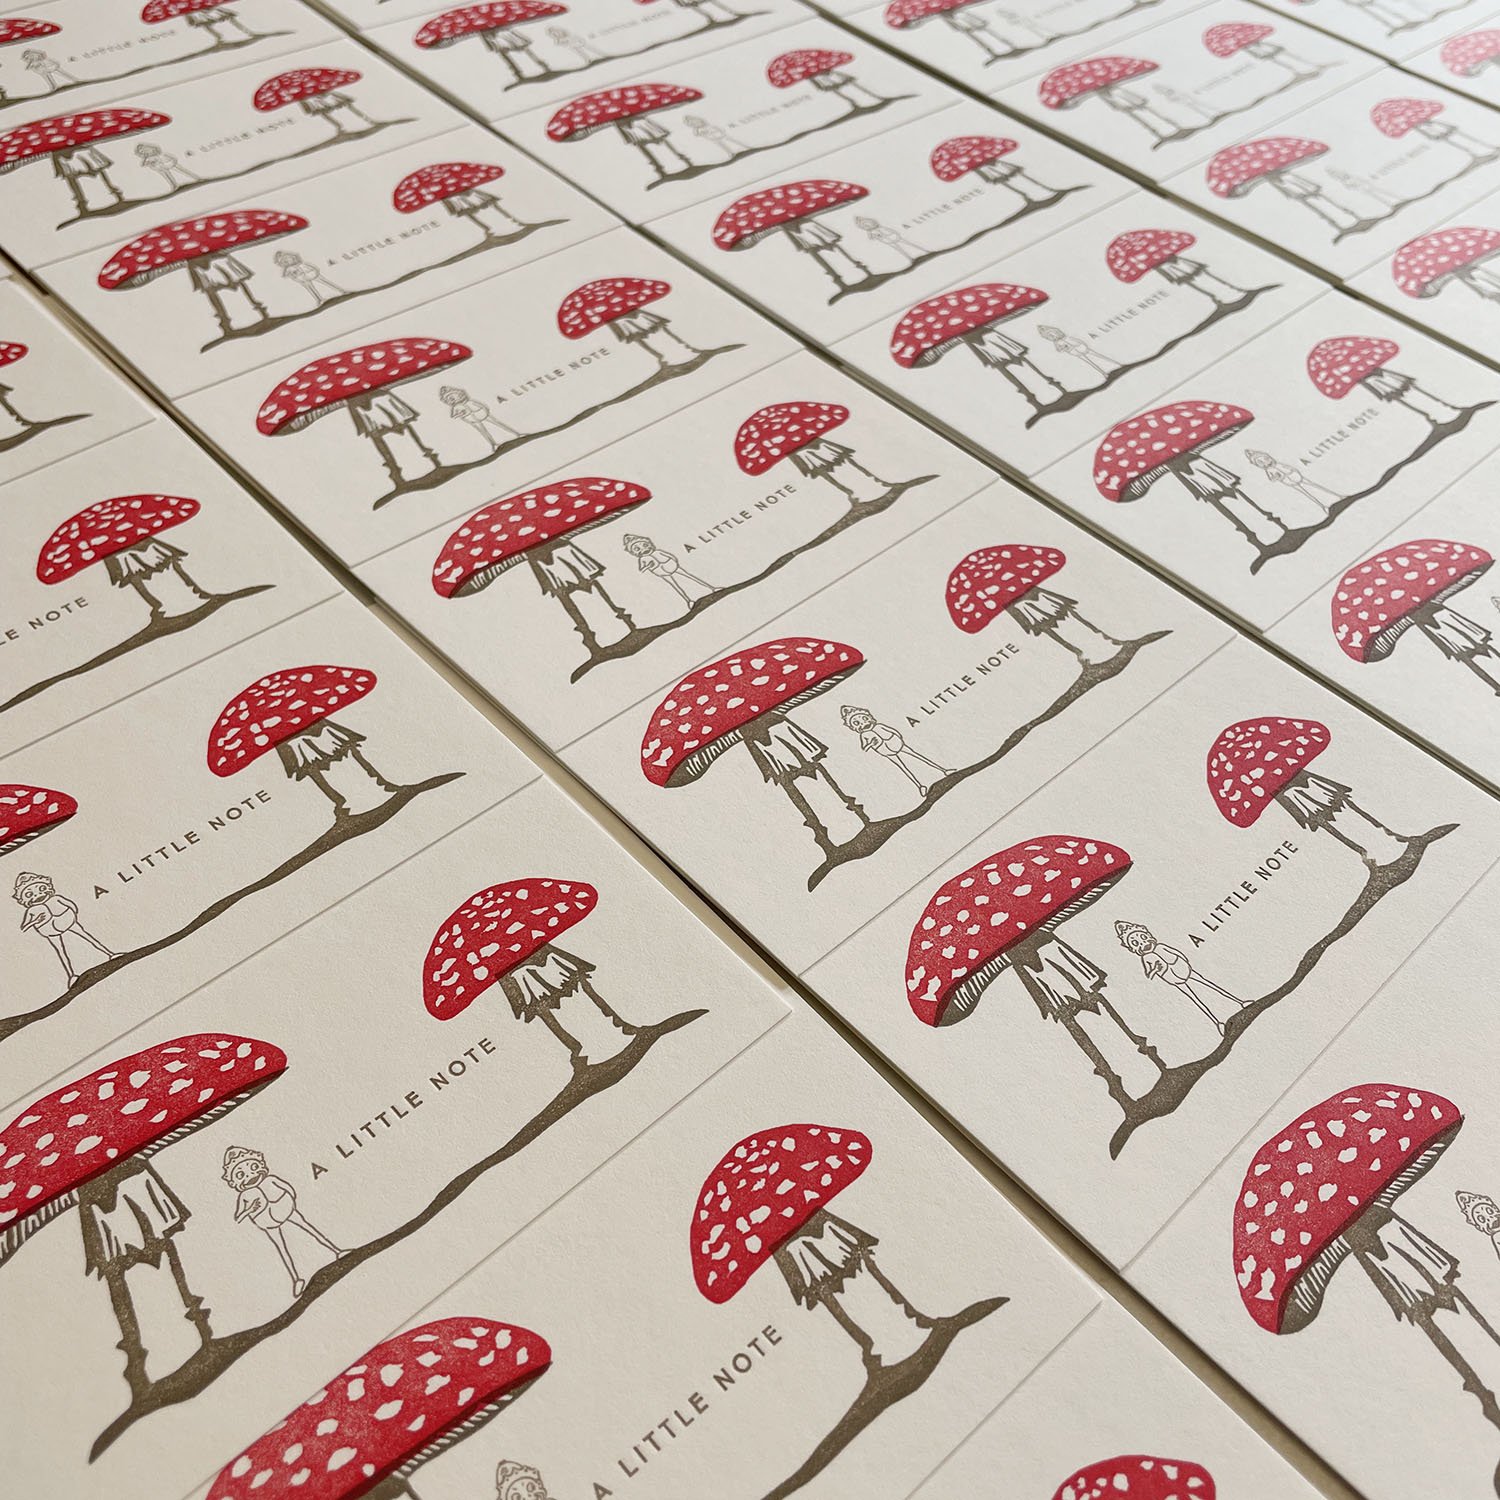 Letterpress notecards Palmer Cox Brownie and red mushrooms 